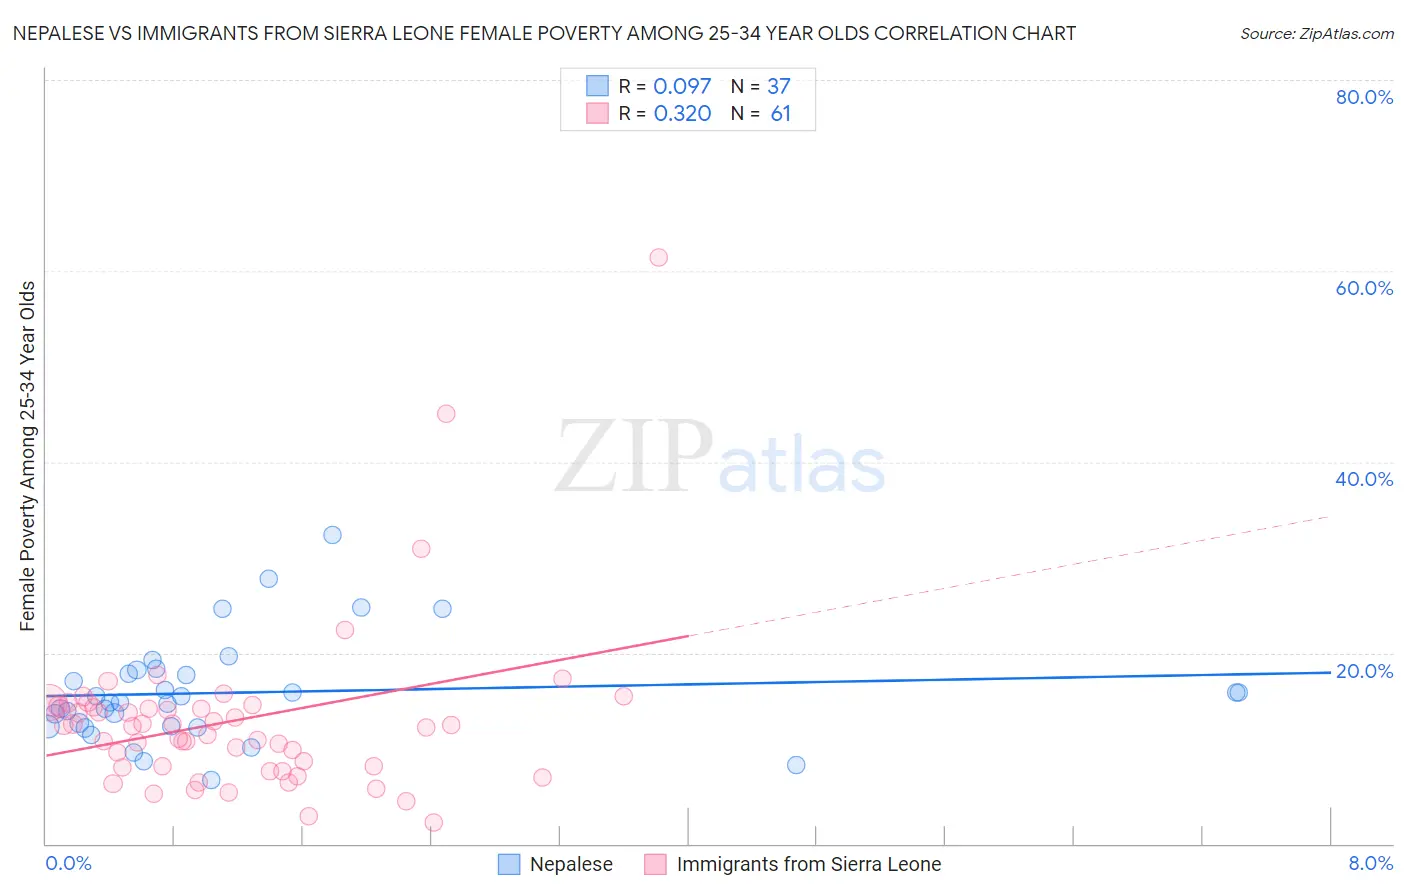 Nepalese vs Immigrants from Sierra Leone Female Poverty Among 25-34 Year Olds